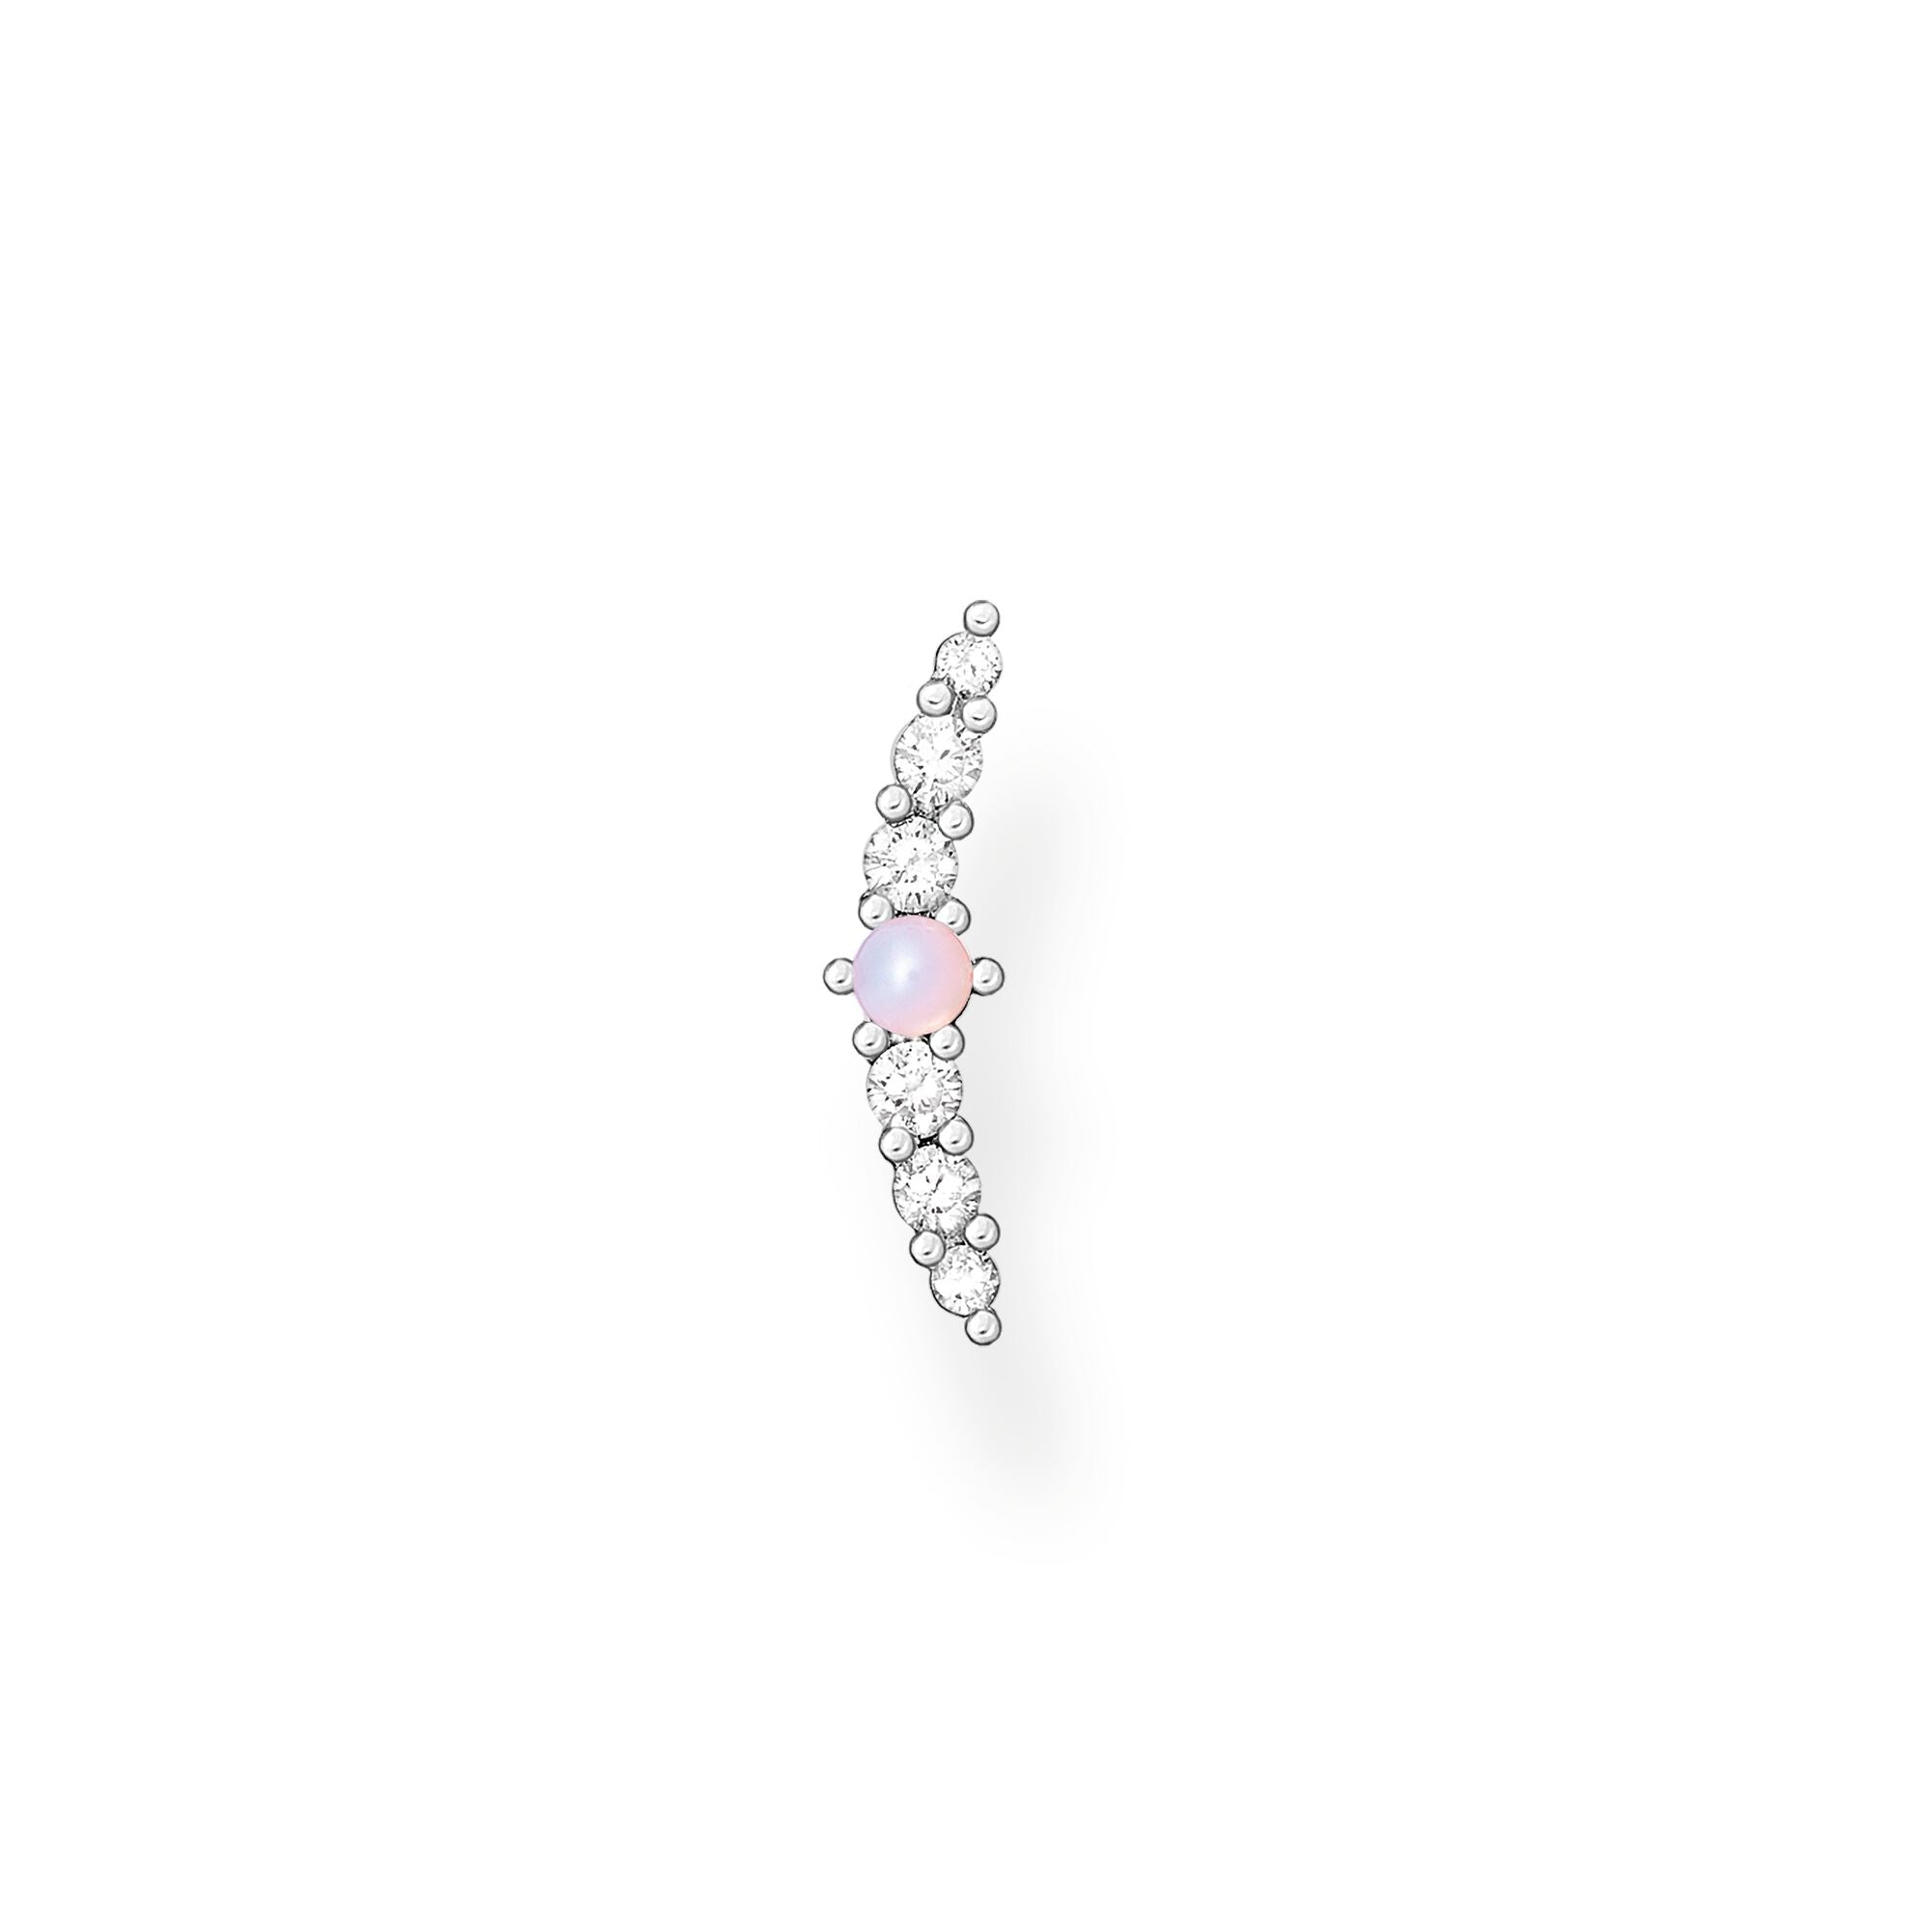 Single Ear Stud Curved Pink And White Stones - Silver